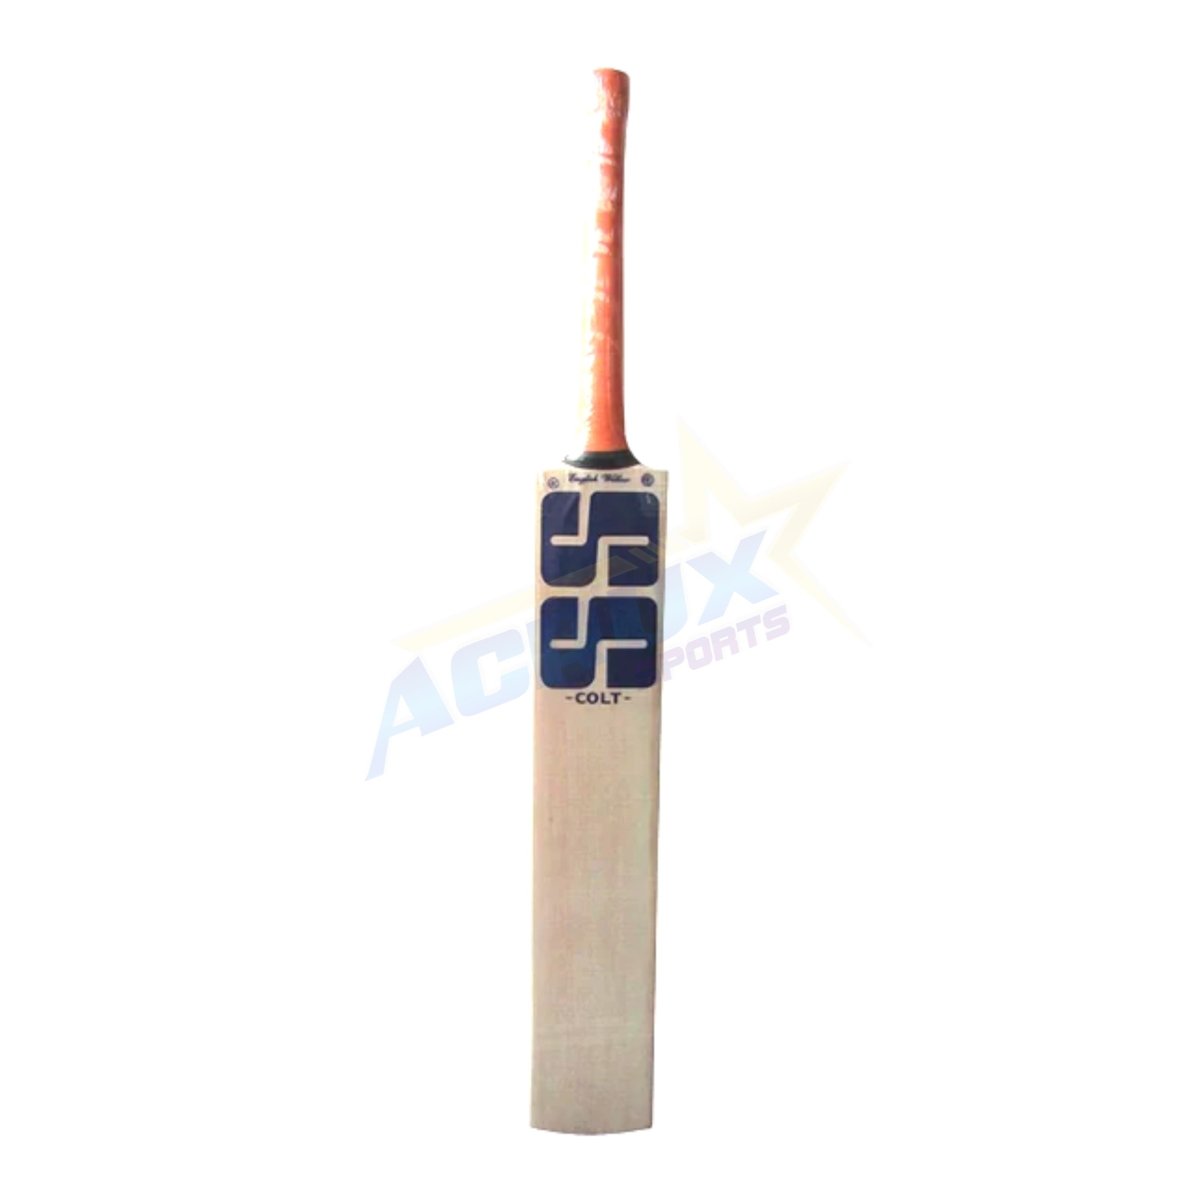 SS Colt Youth English Willow Cricket Bat